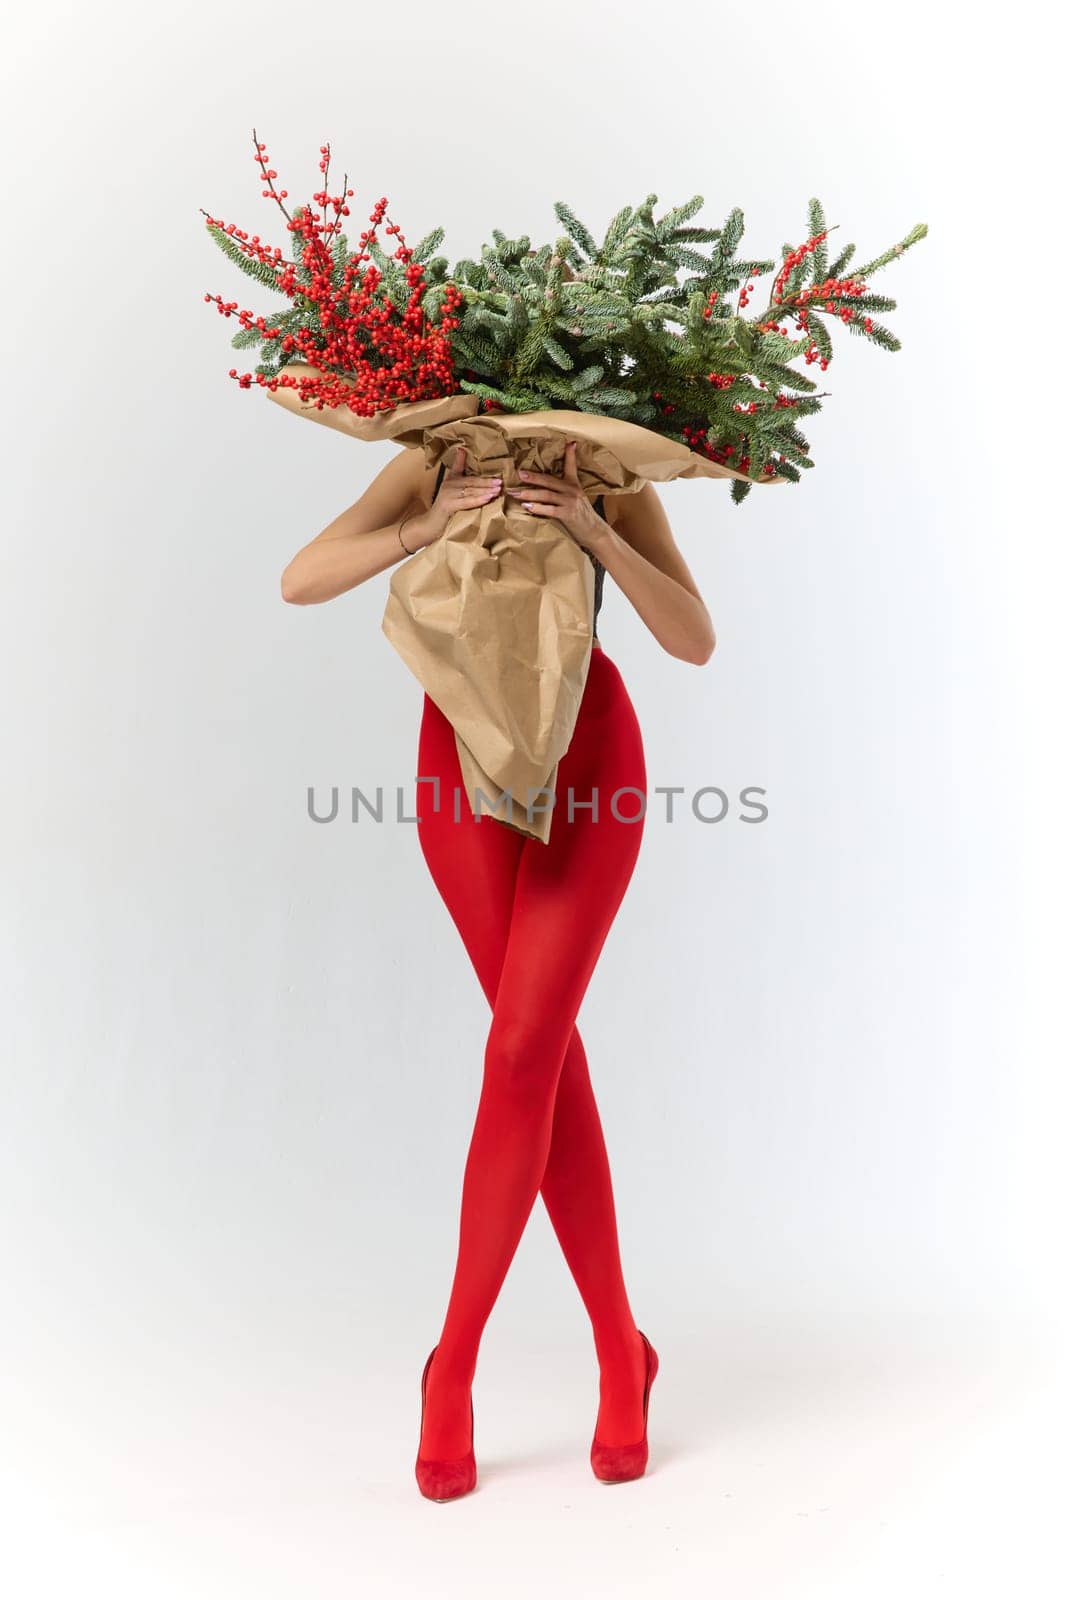 A long girl in red tights and high-heeled shoes holds a huge bouquet of fir branches and red berries wrapped in cardboard paper, she closes with a bouquet, photo studio with white background. High quality 4k footage